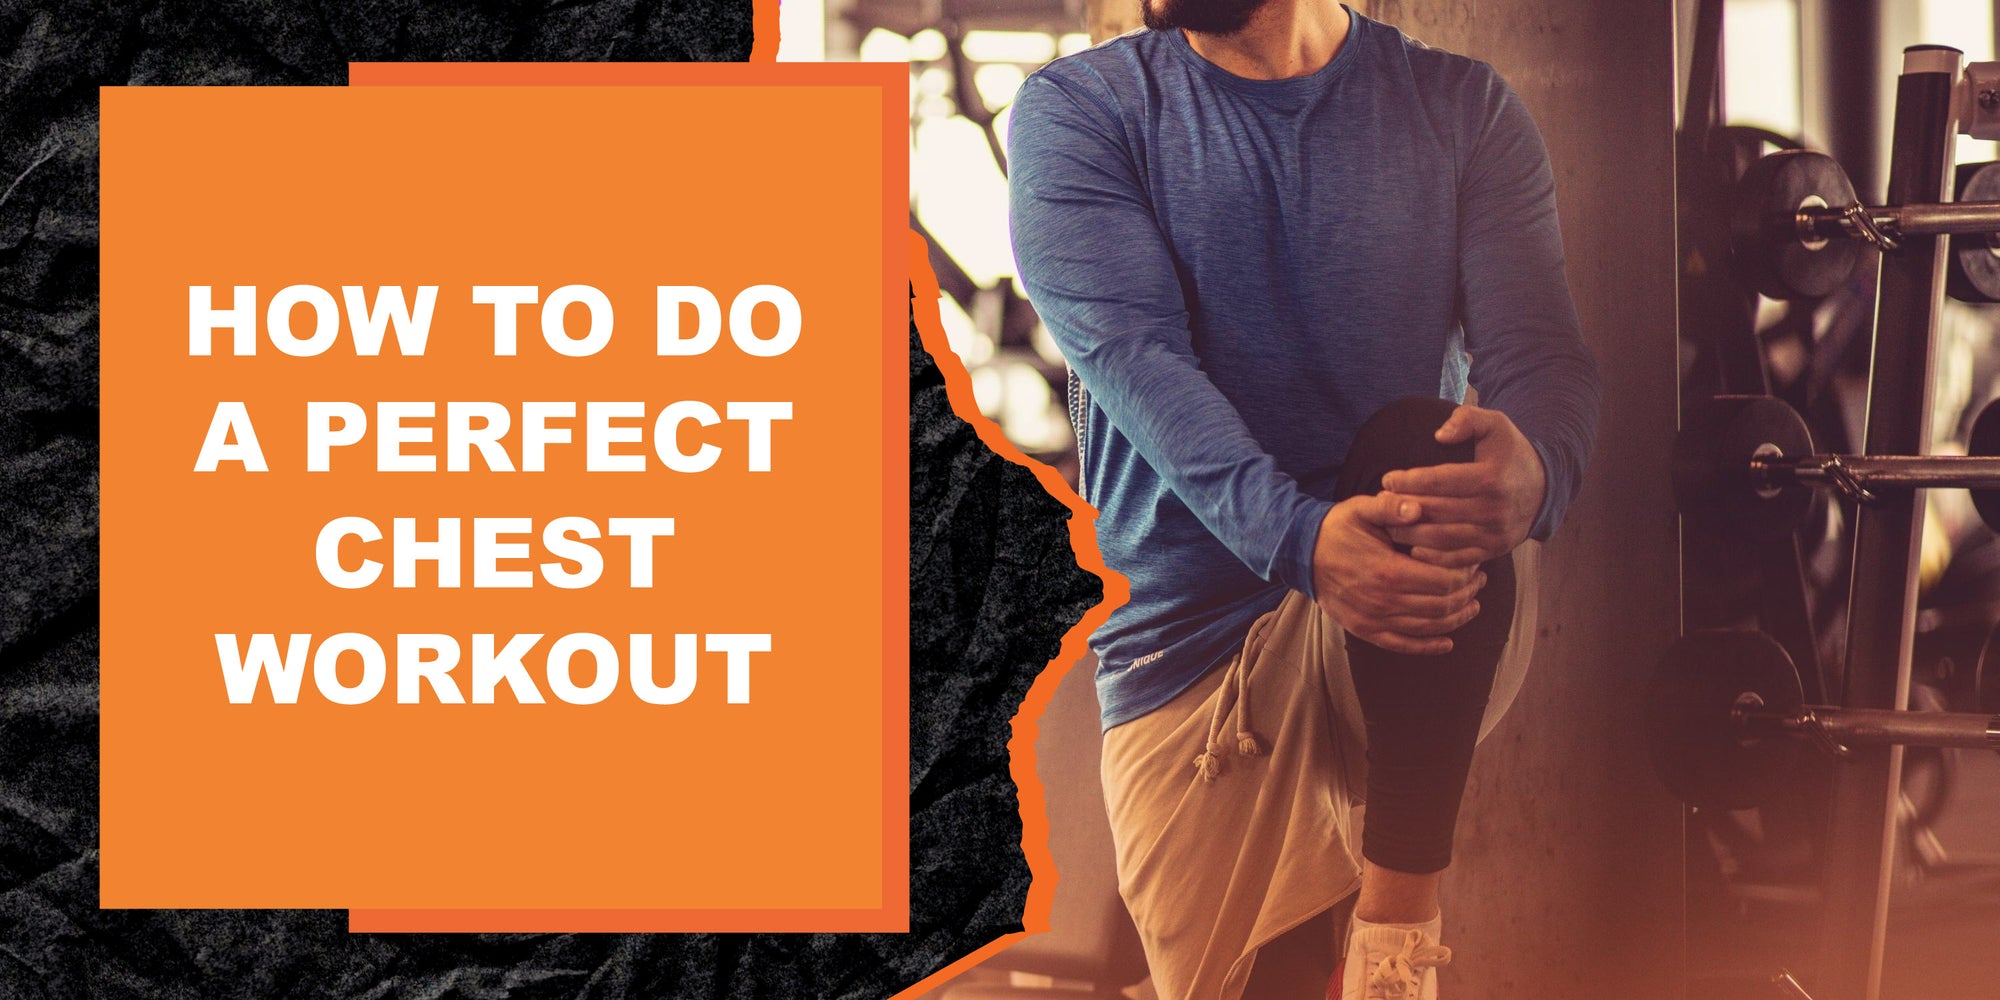 How to Do a Perfect Chest Workout